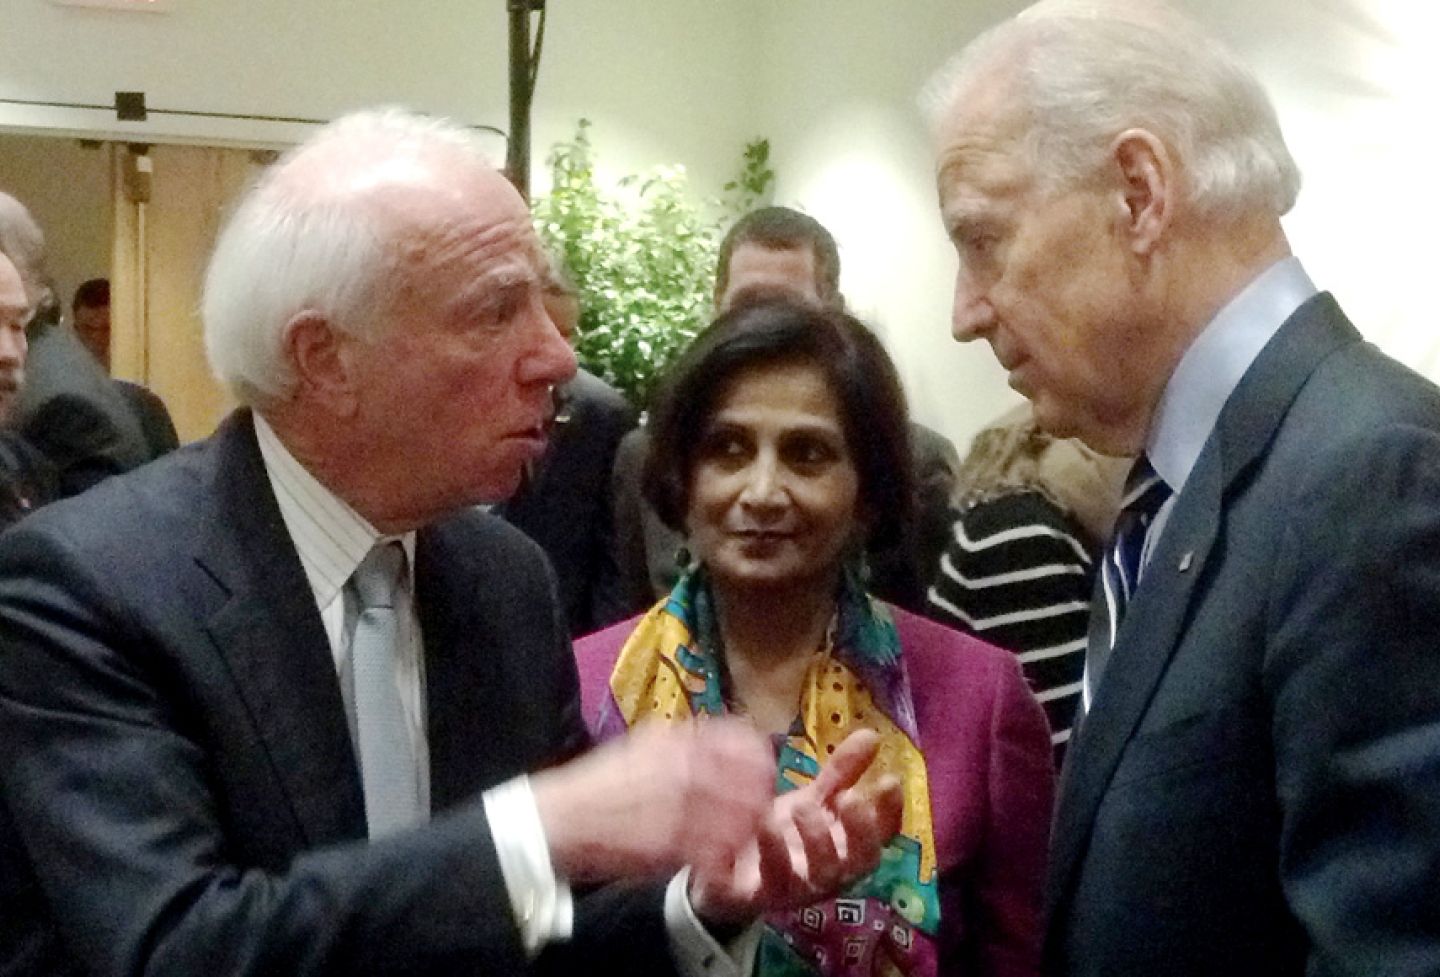 Professor Richard Bonnie takes part in a roundtable discussion on gun violence and possible reforms with Vice President Joe Biden in 2013, spurred by the Sandy Hook shooting. 